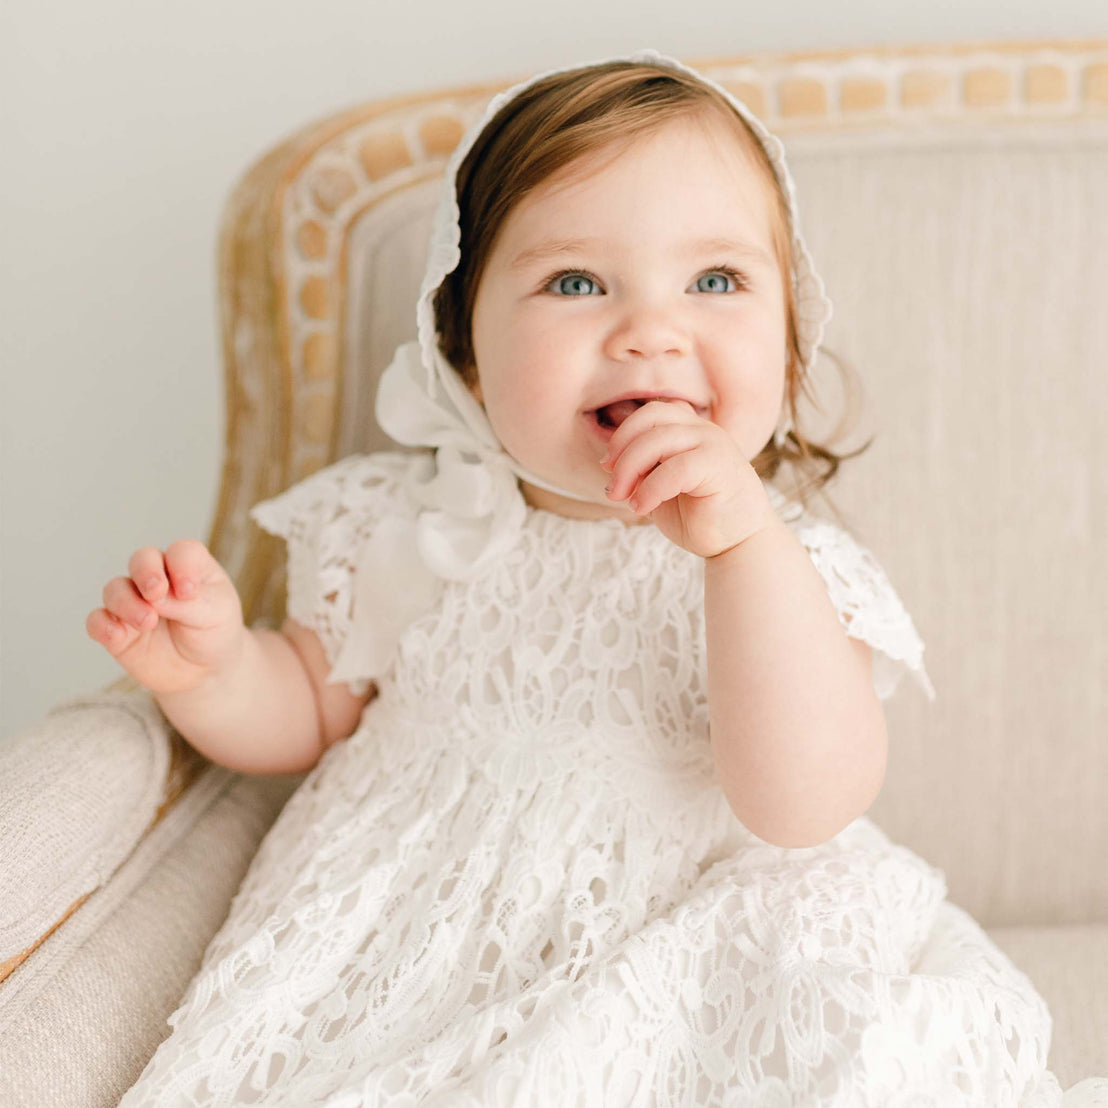 Smiling baby girl on a couch and wearing the Lola Christening Gown and Bonnet, a baptismal gown made with a cotton undergown in light ivory featuring an all-over lace overlay.